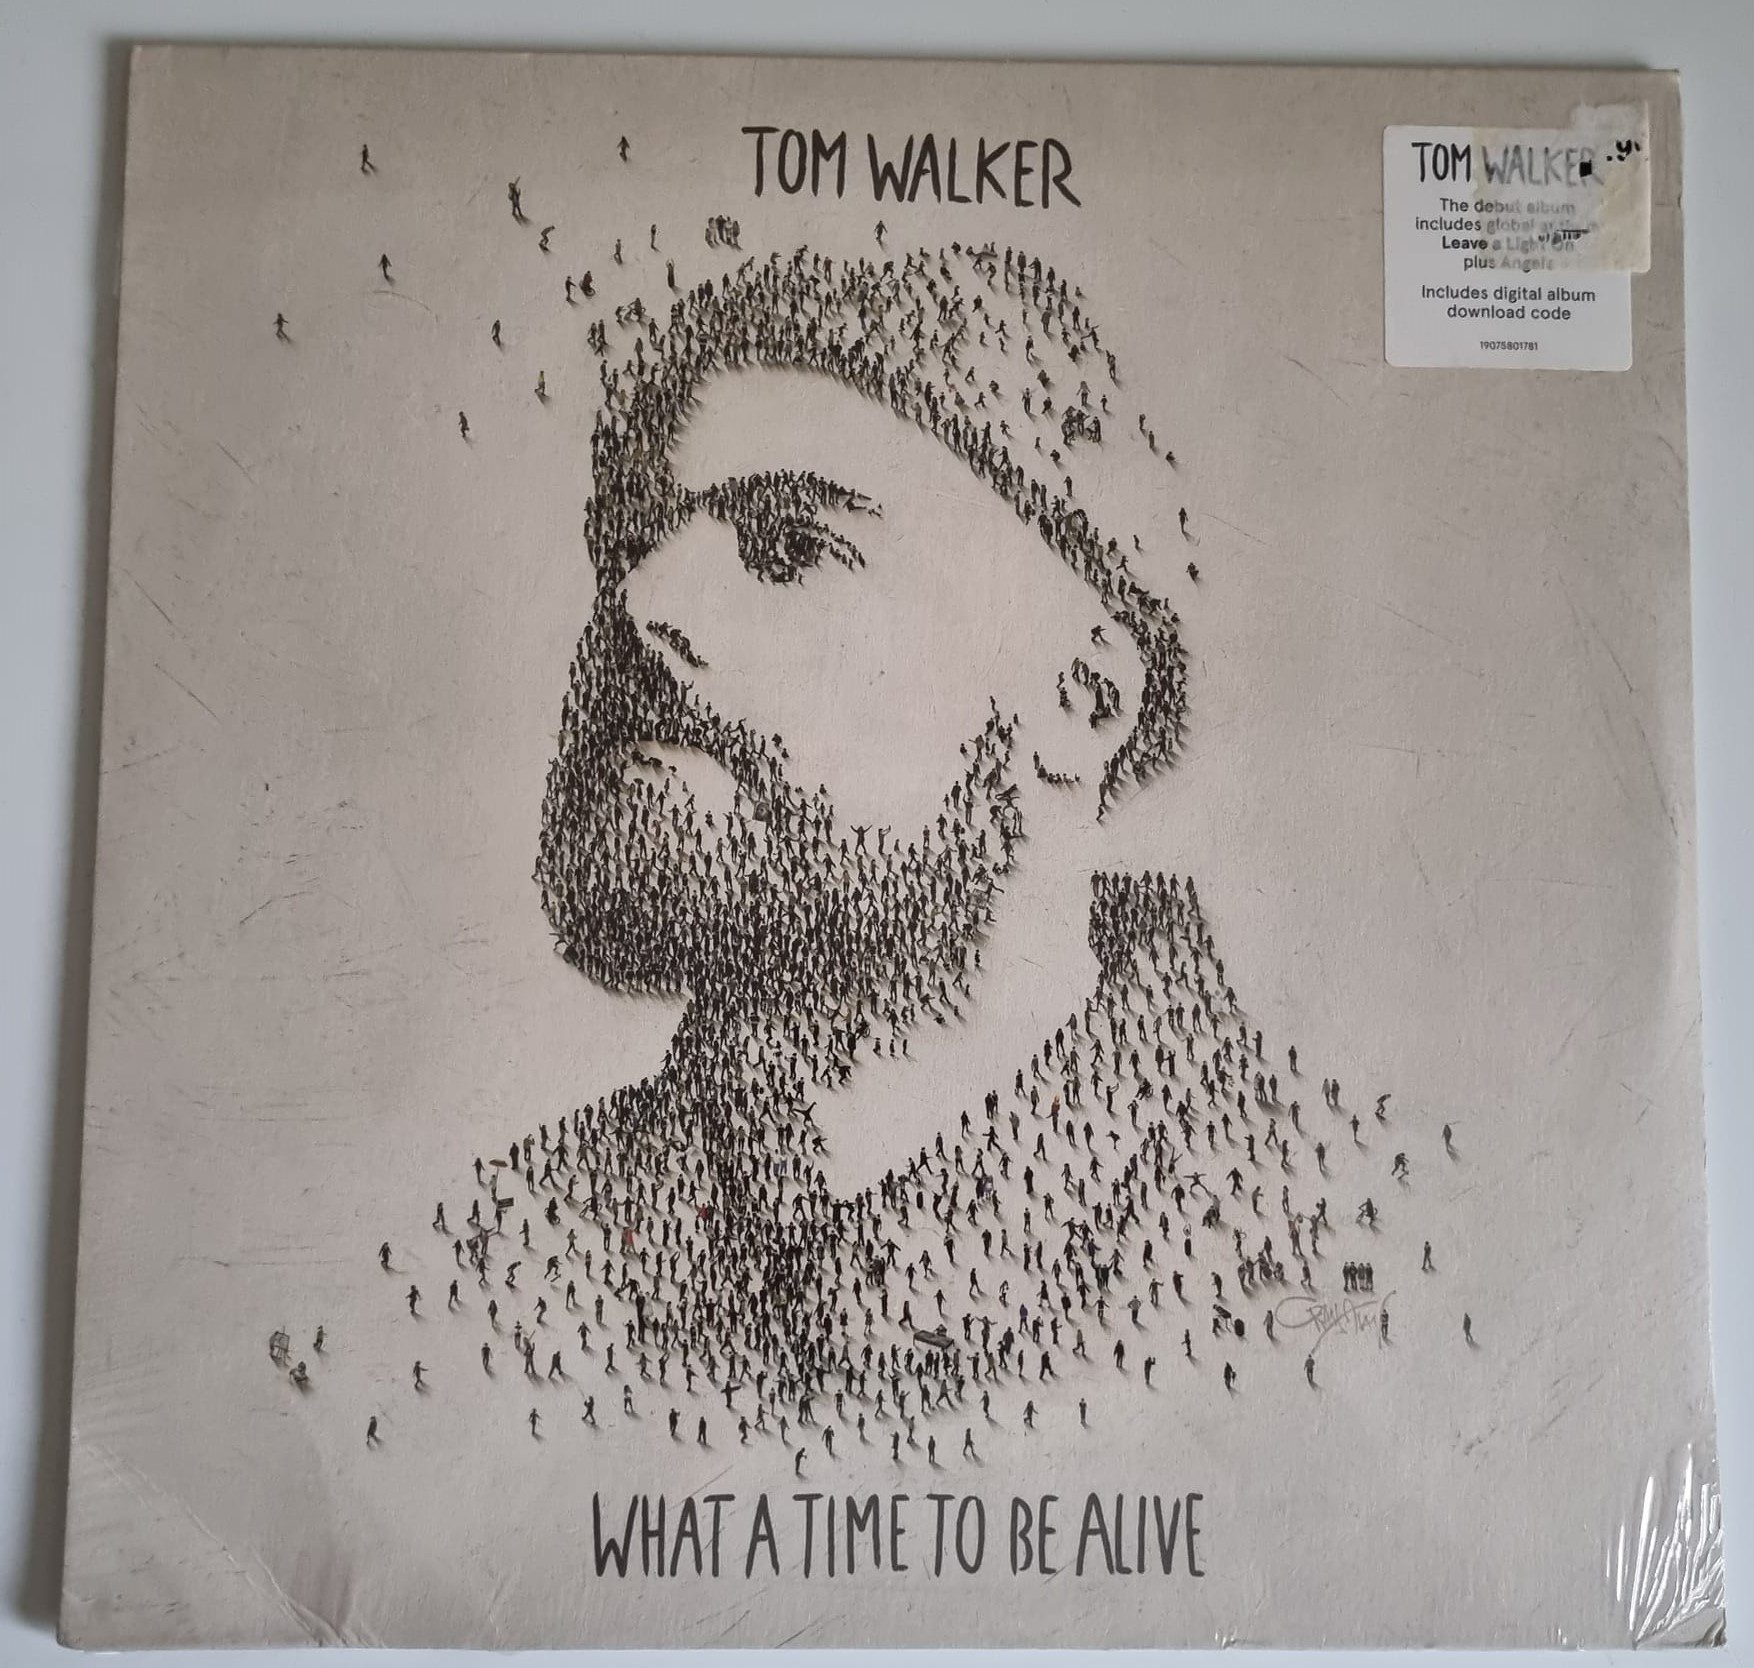 Buy this rare Tom Walker record by clicking here